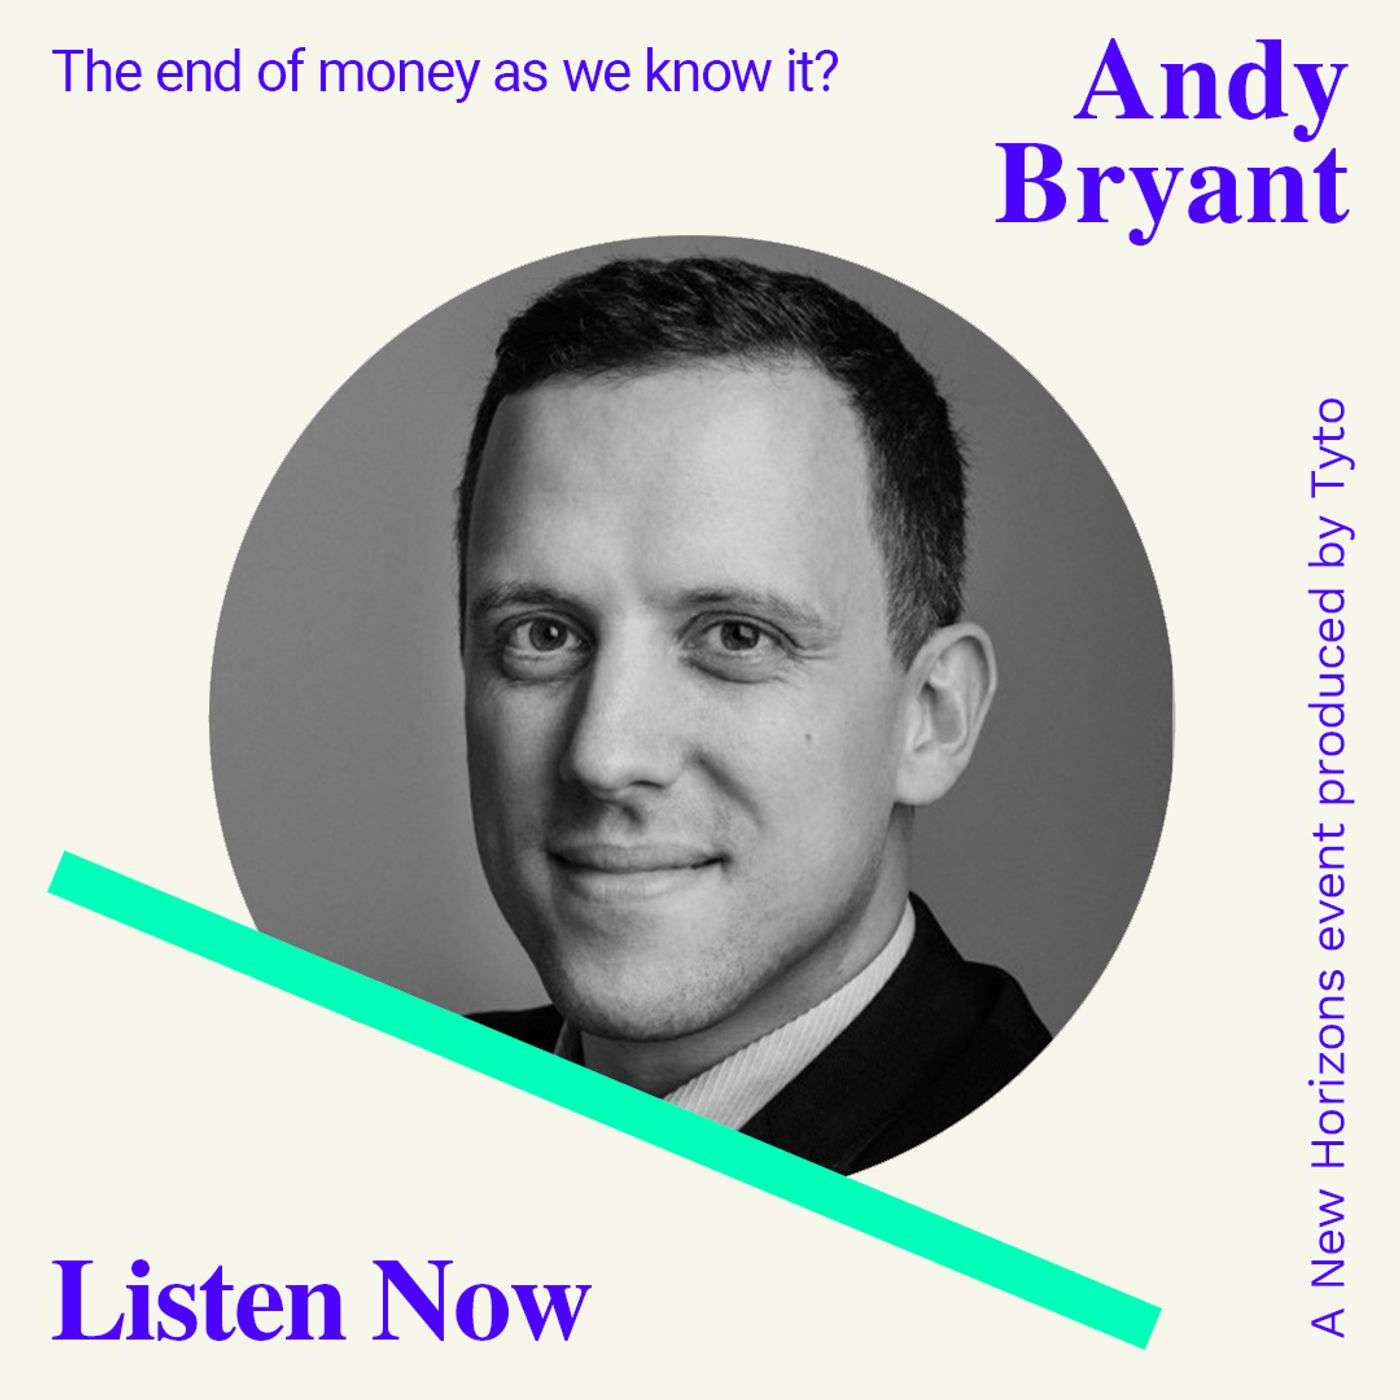 S2 Ep6: Andy Bryant - The end of money as we know it? - New Horizons Special 04